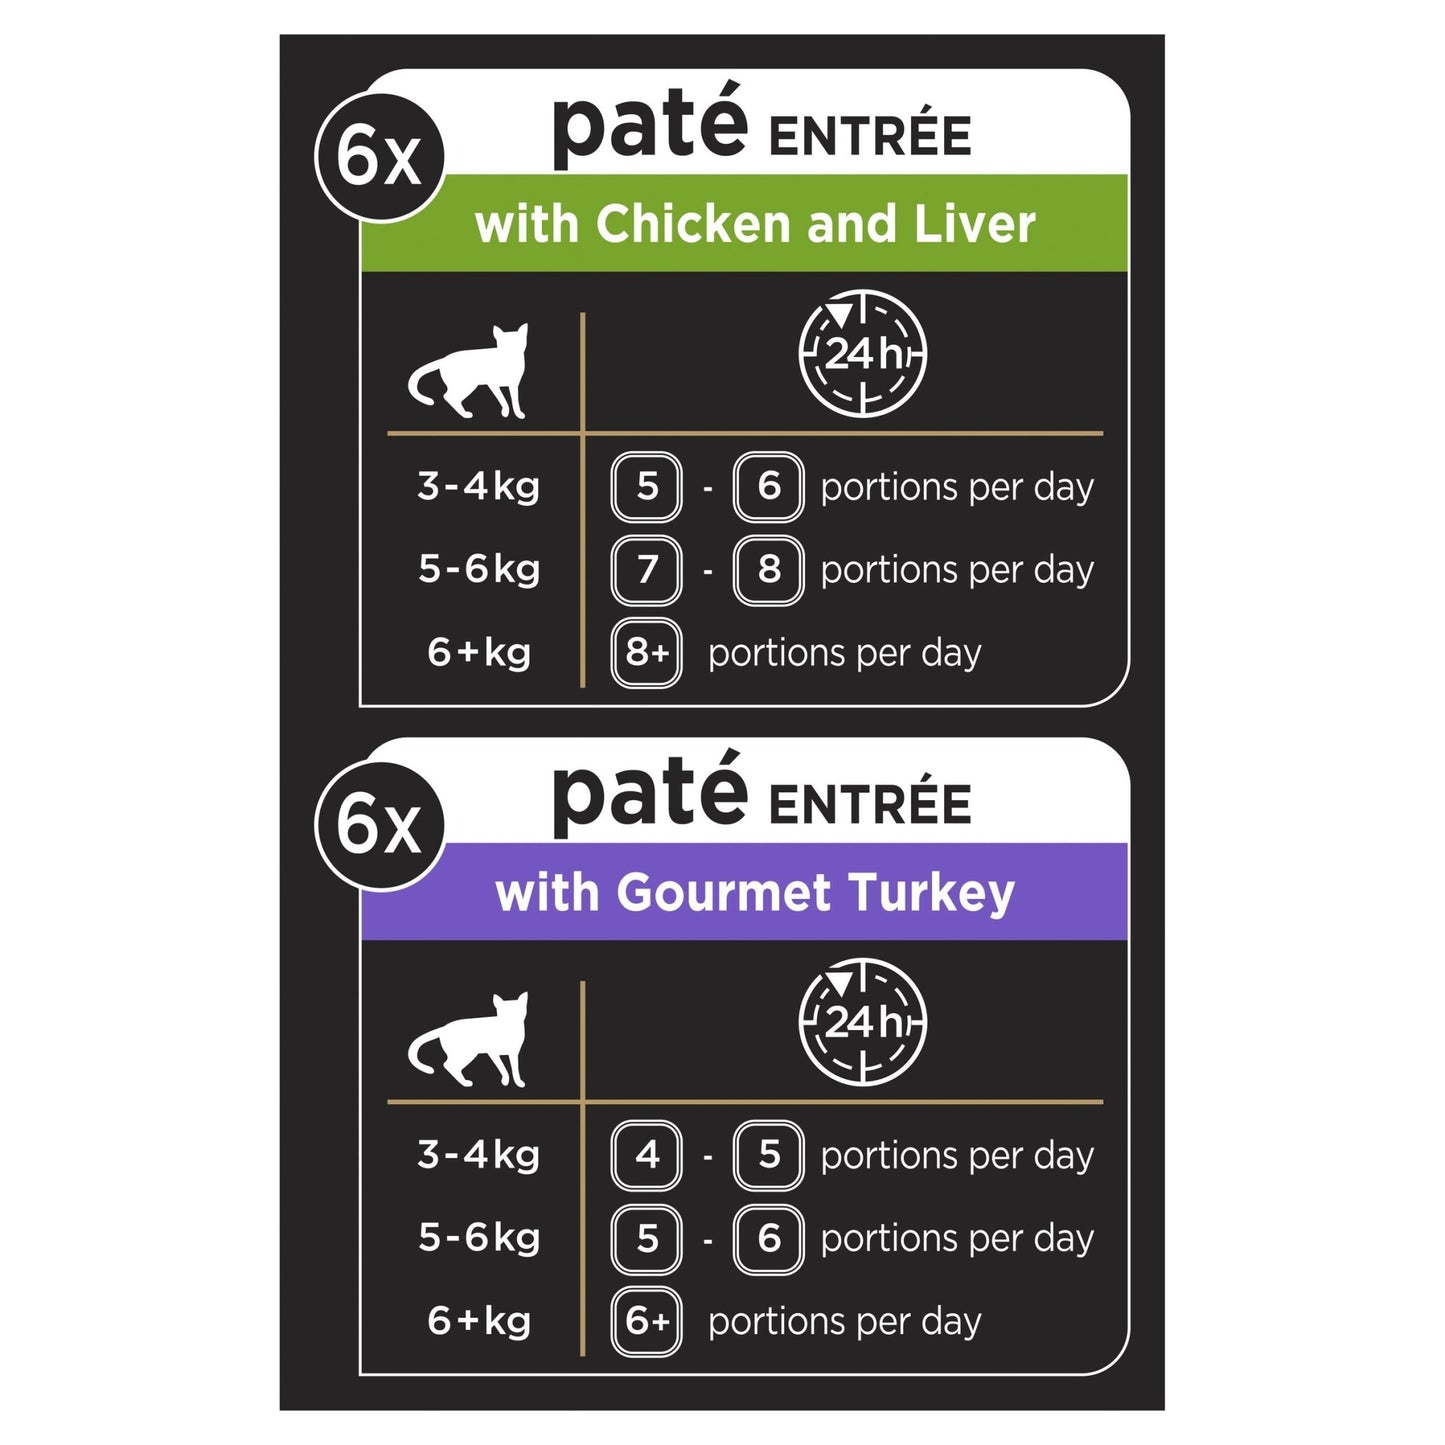 Dine Perfect Portions 6x75g Pate Entree - Woonona Petfood & Produce